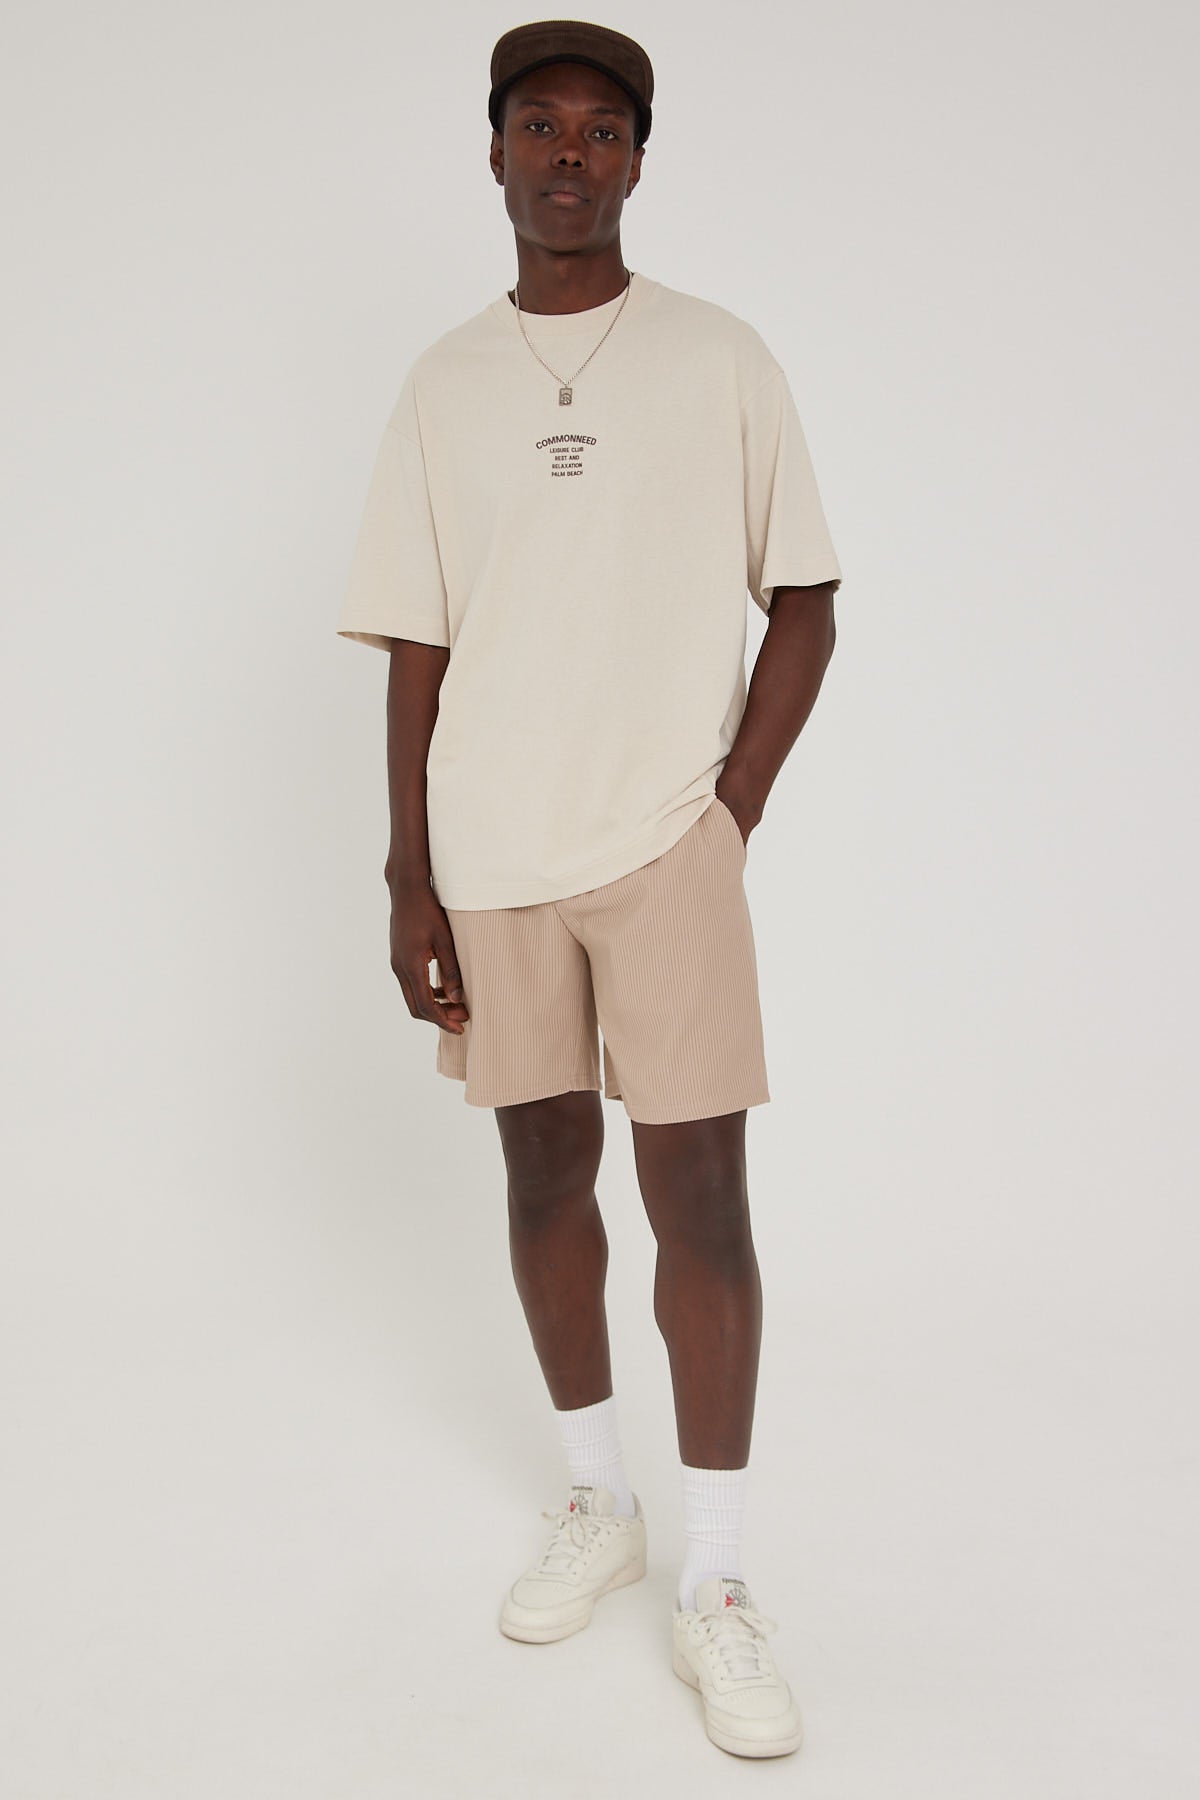 Common Need Relaxation Boxy Tee White